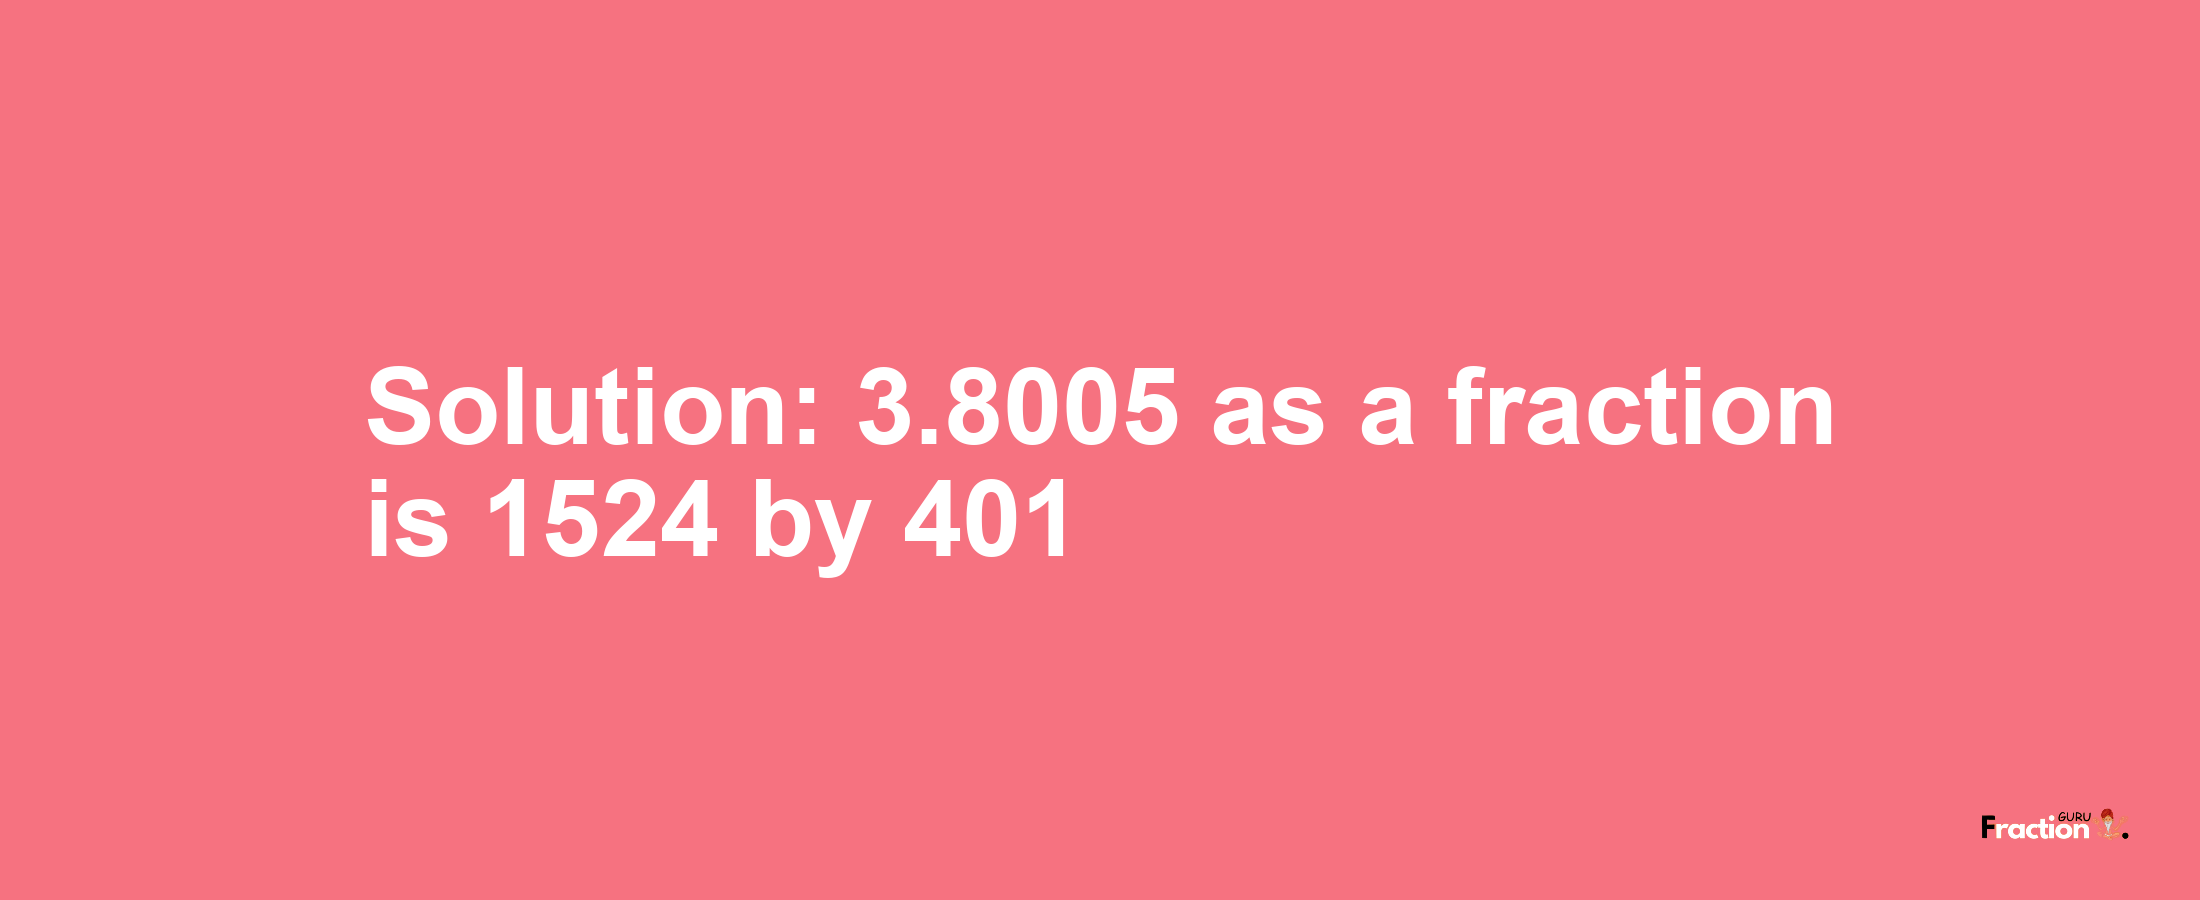 Solution:3.8005 as a fraction is 1524/401